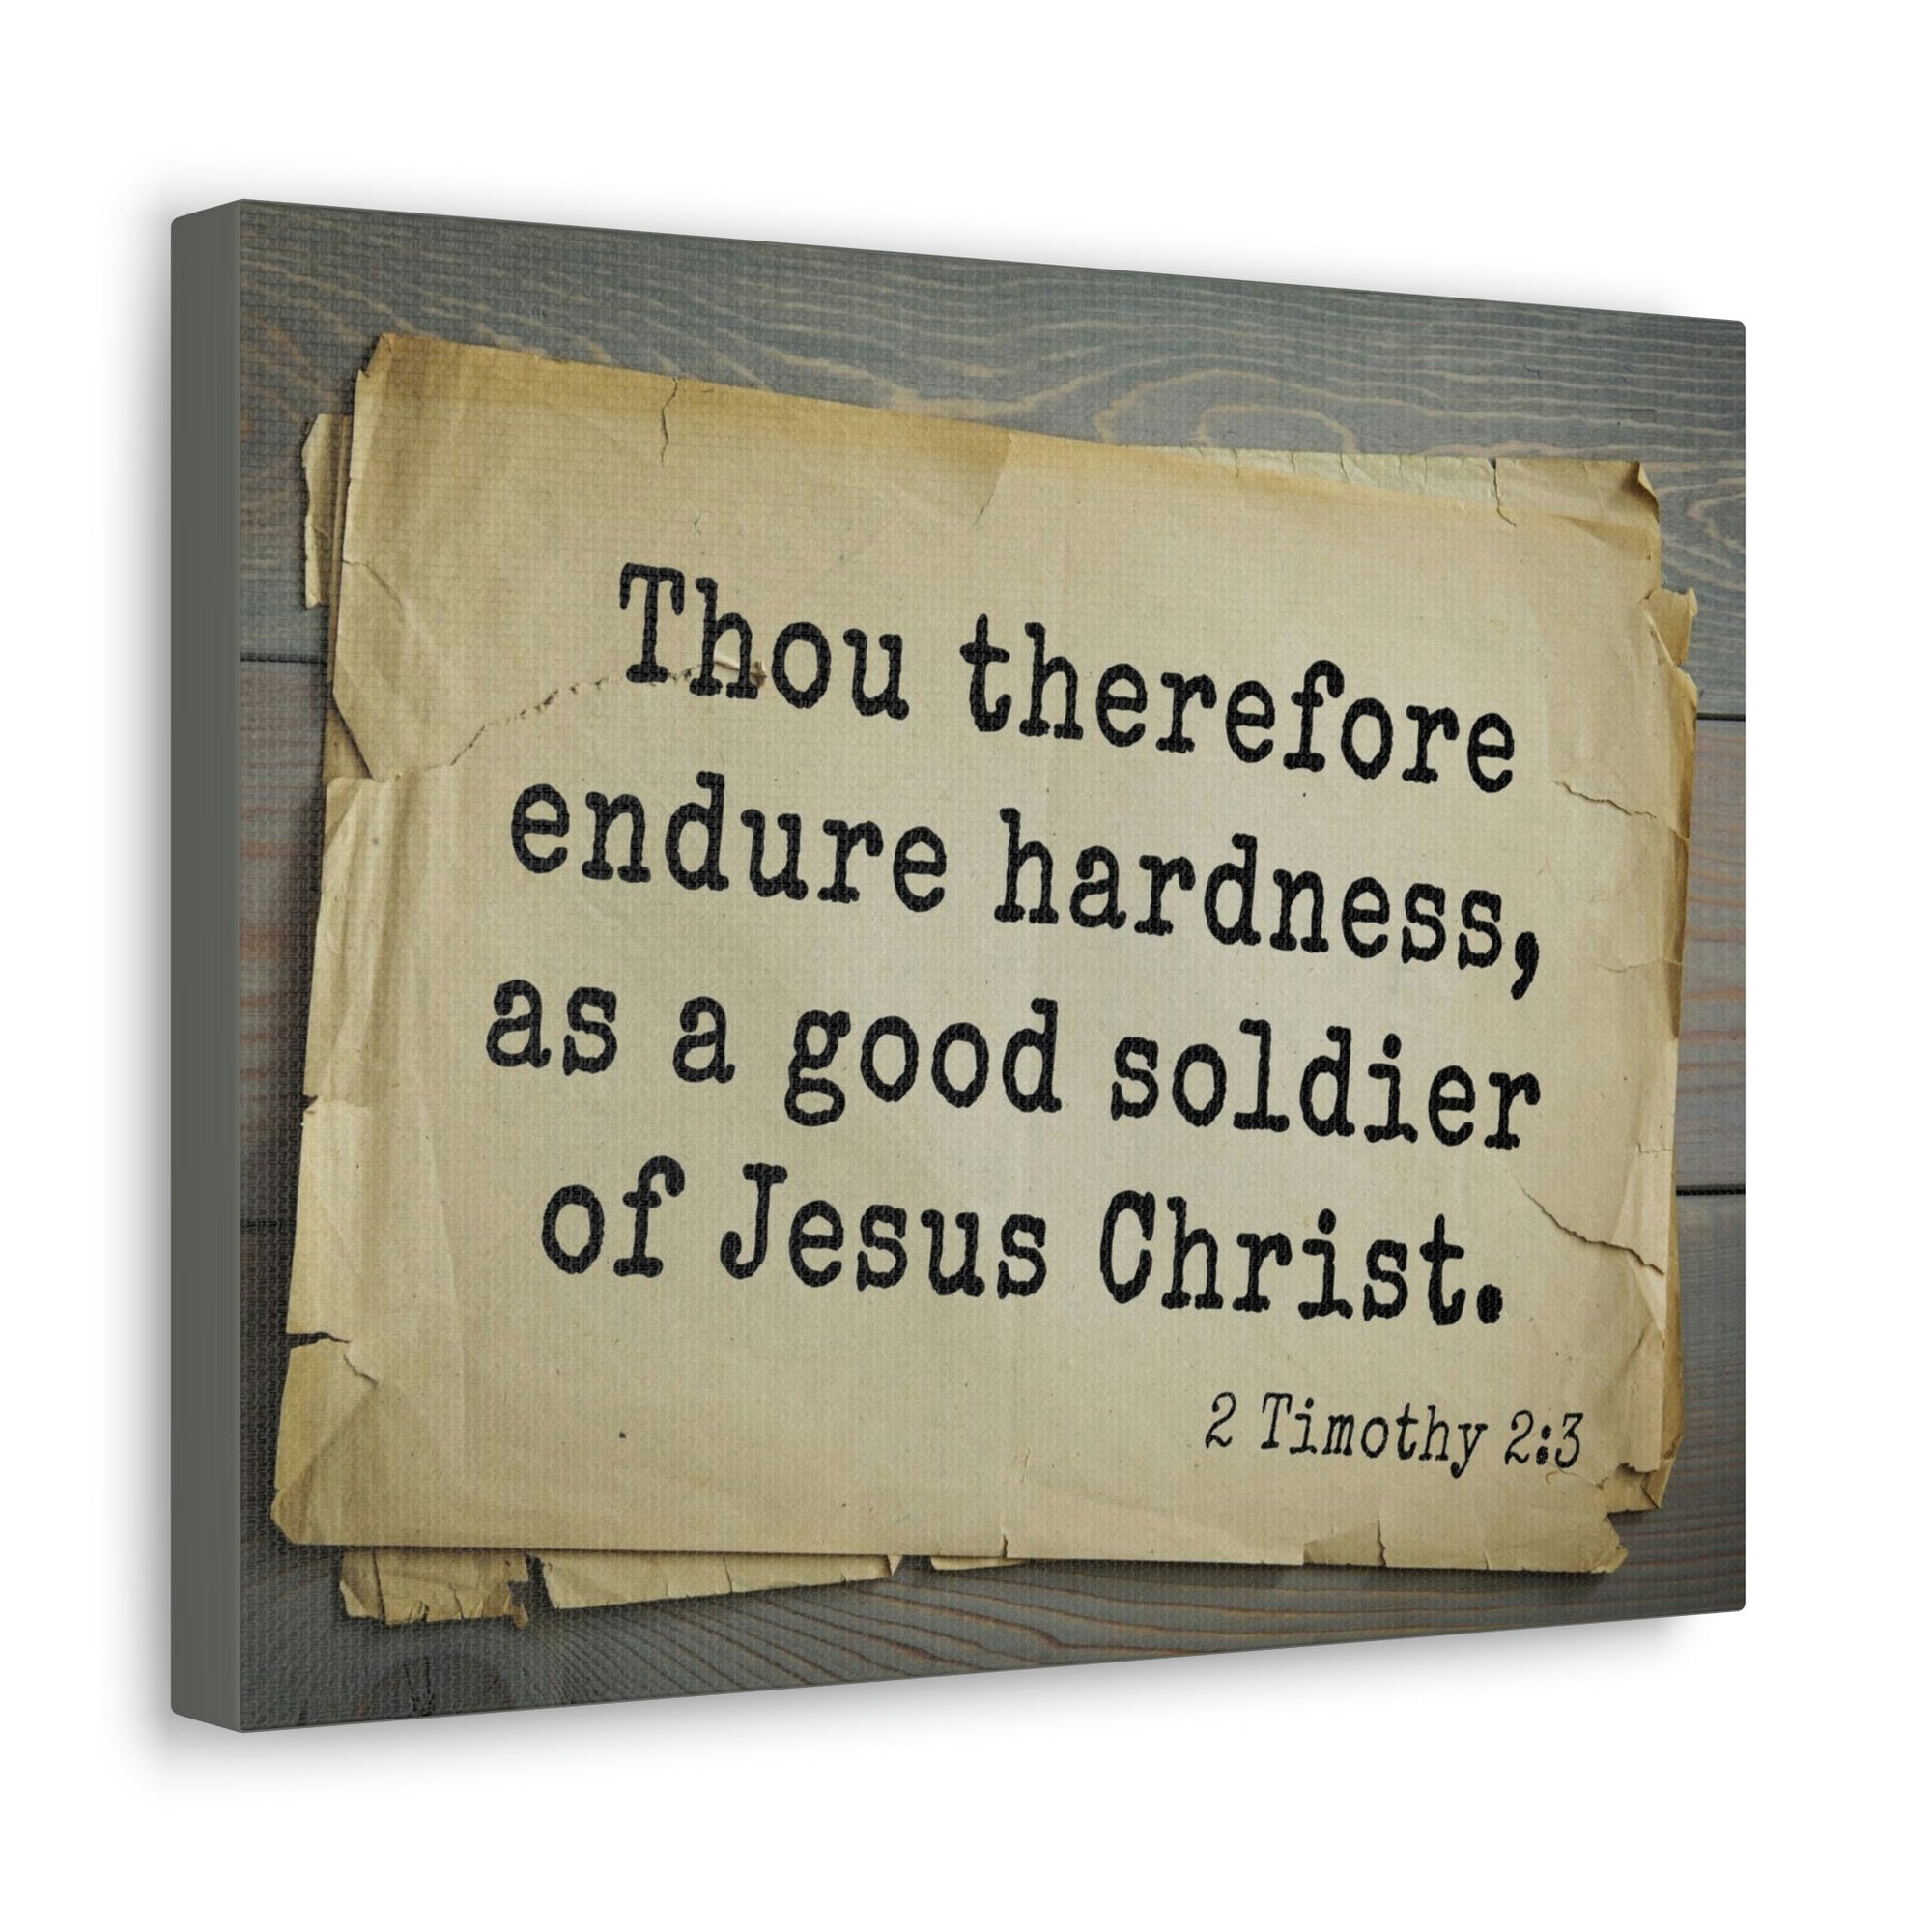 Scripture Walls Soldier Of Jesus Christ 2 Timothy 2:3 Bible Verse Canvas Christian Wall Art Bible Verse Print Ready To Hang Unframed-Express Your Love Gifts